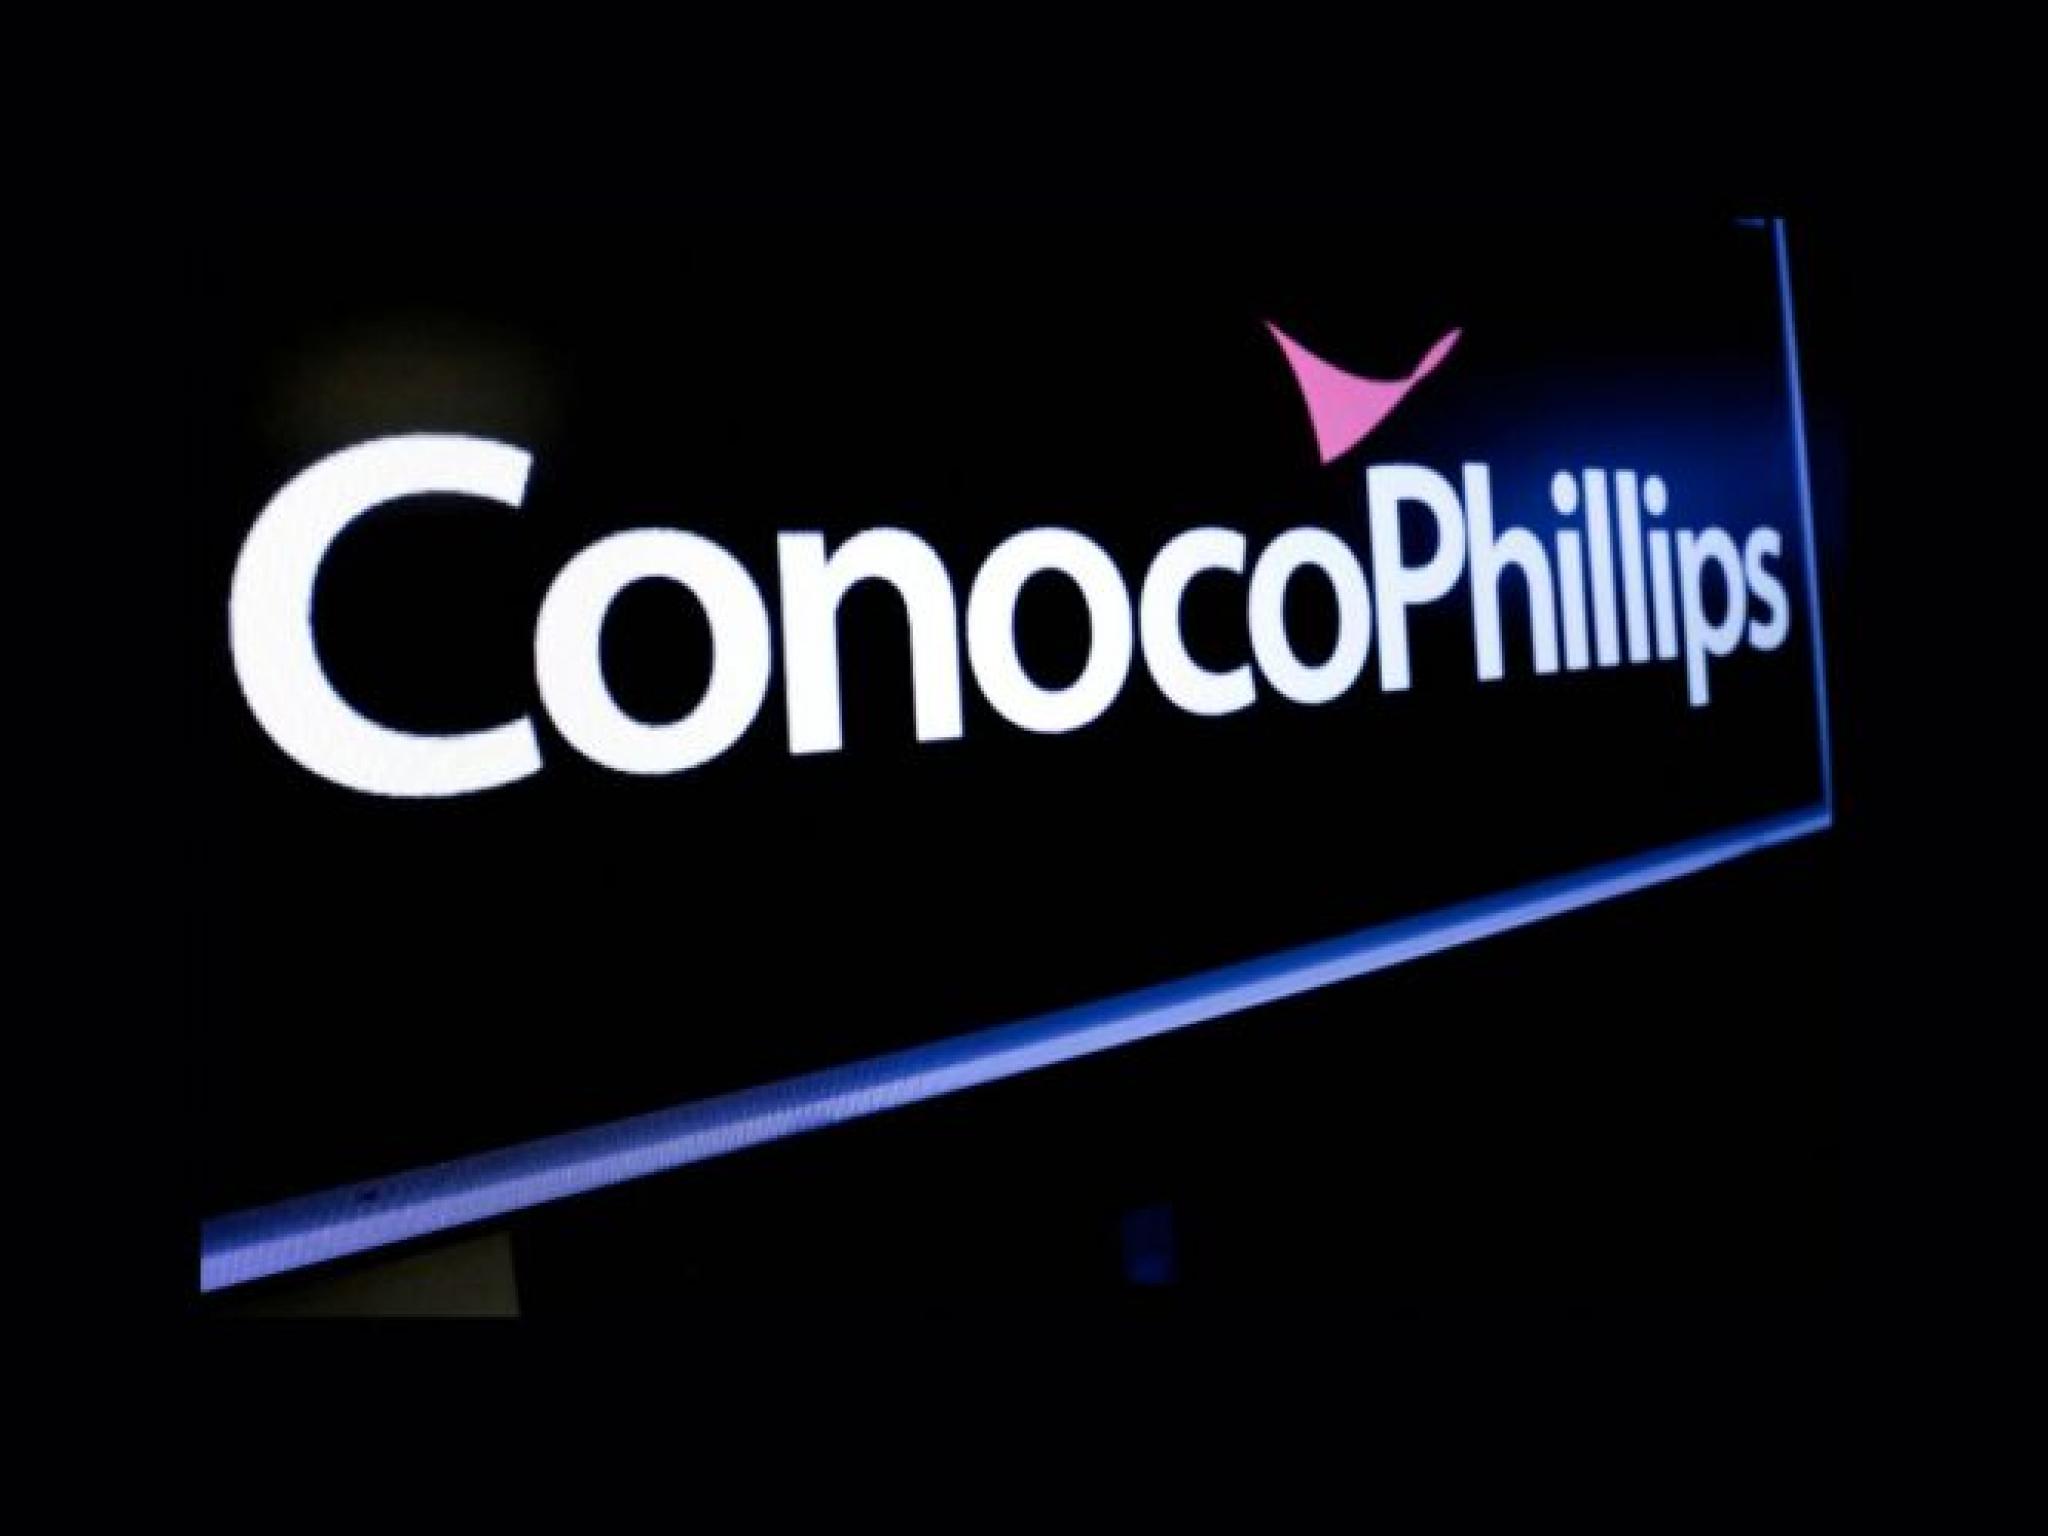  conocophillips-likely-to-report-lower-q1-earnings-here-are-the-recent-forecast-changes-from-wall-streets-most-accurate-analysts 